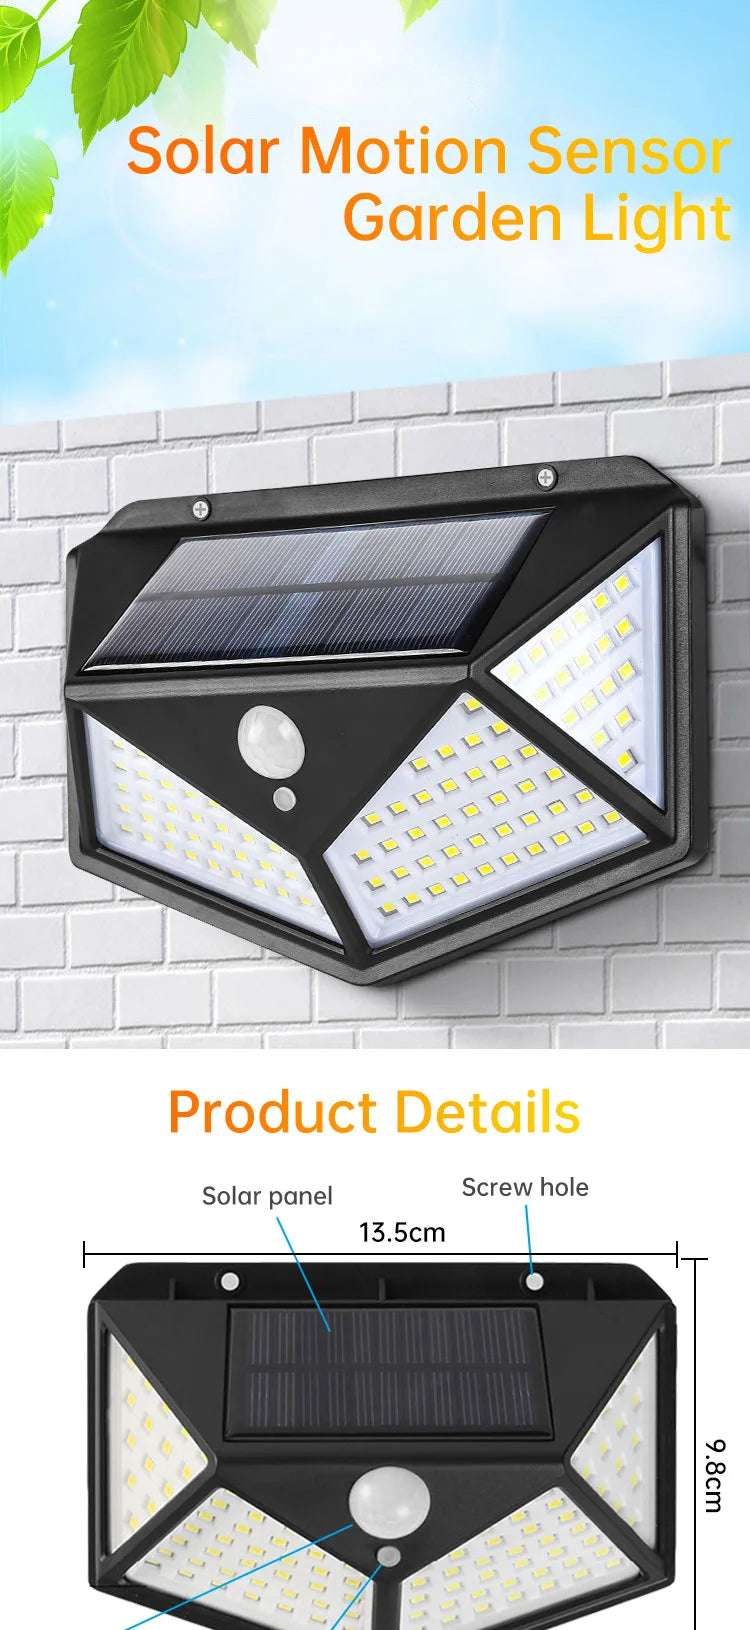 Outdoor solar-powered light with motion sensor, wide coverage, and waterproof design for easy installation.